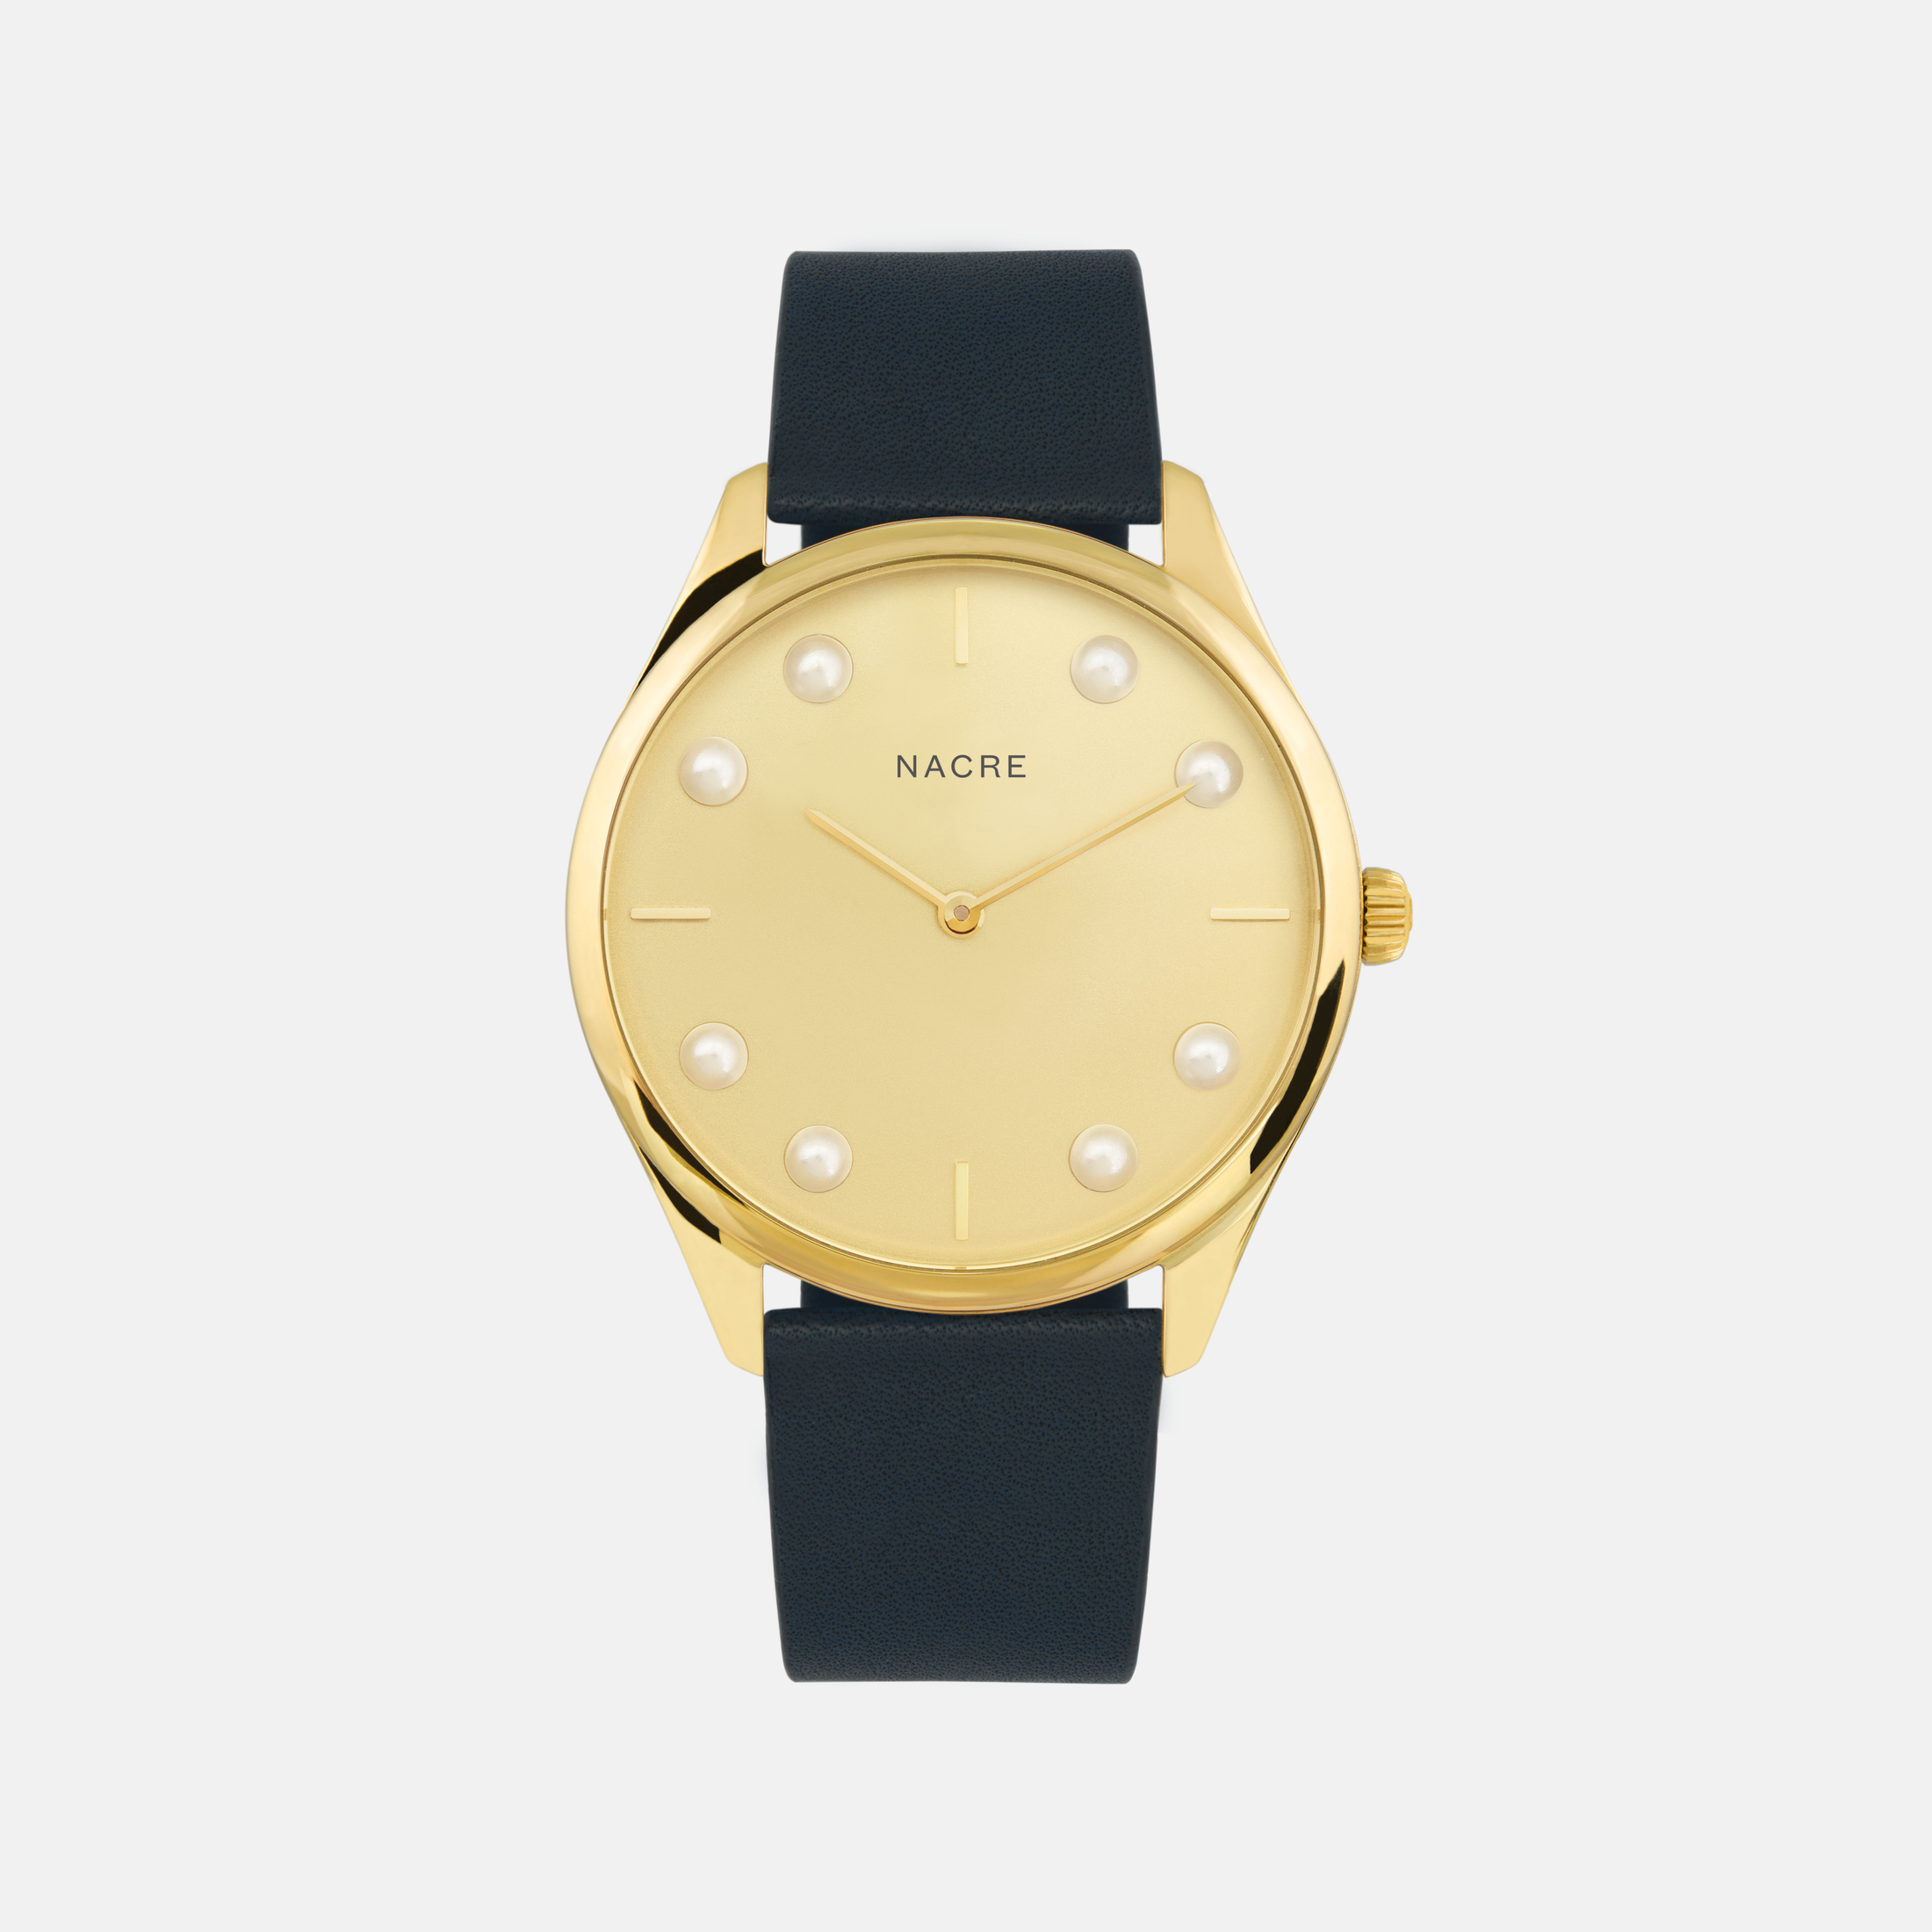 Lune 8 - Gold - Black Leather